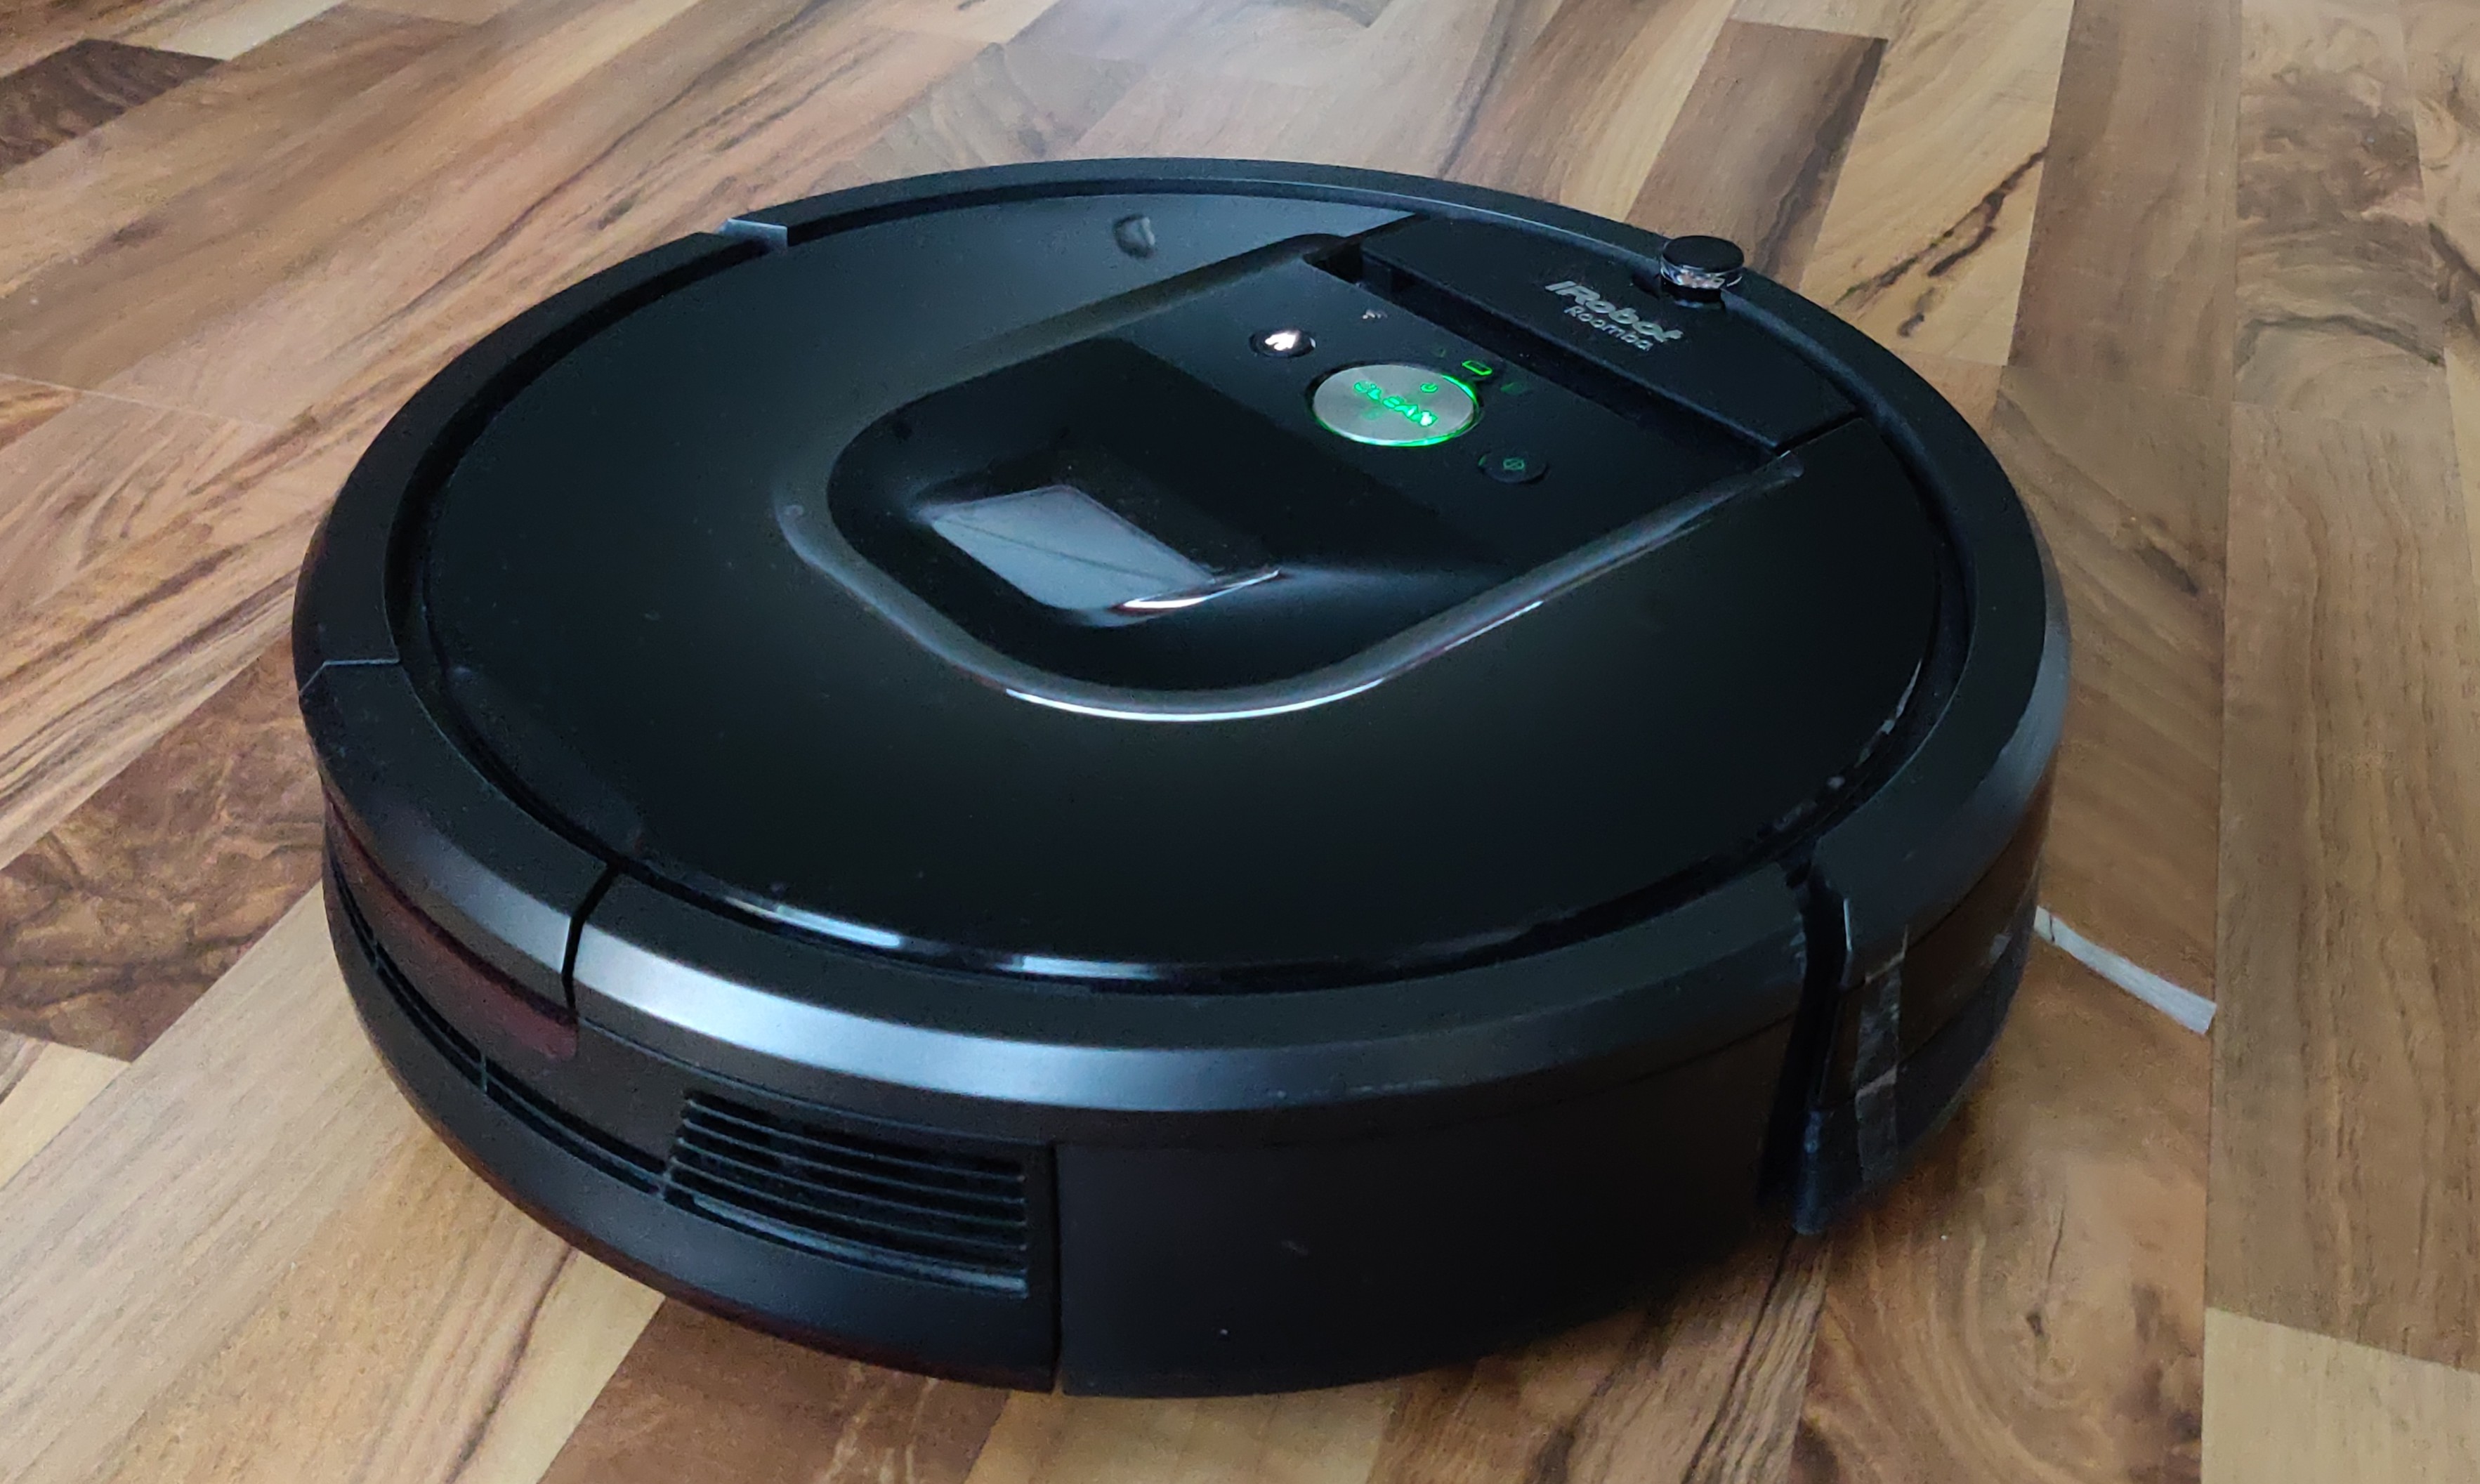 Screaming Roomba realized: Robot Vacuum curses every time it hits an